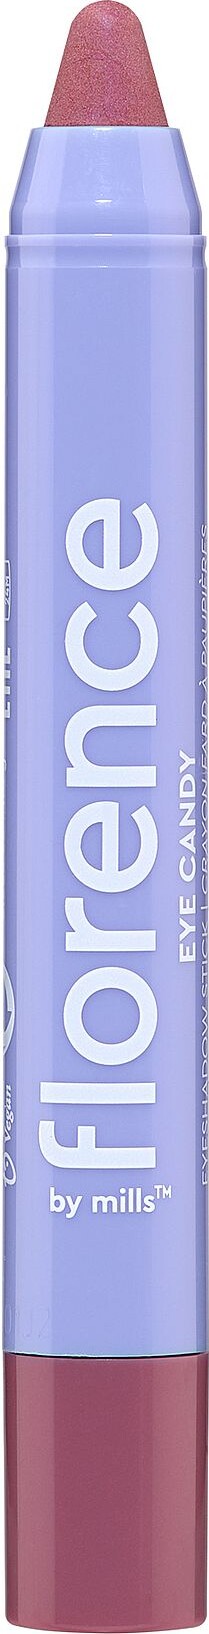 Se Florence By Mills - Eye Candy Eyeshadow Stick - Candy Floss hos Gucca.dk